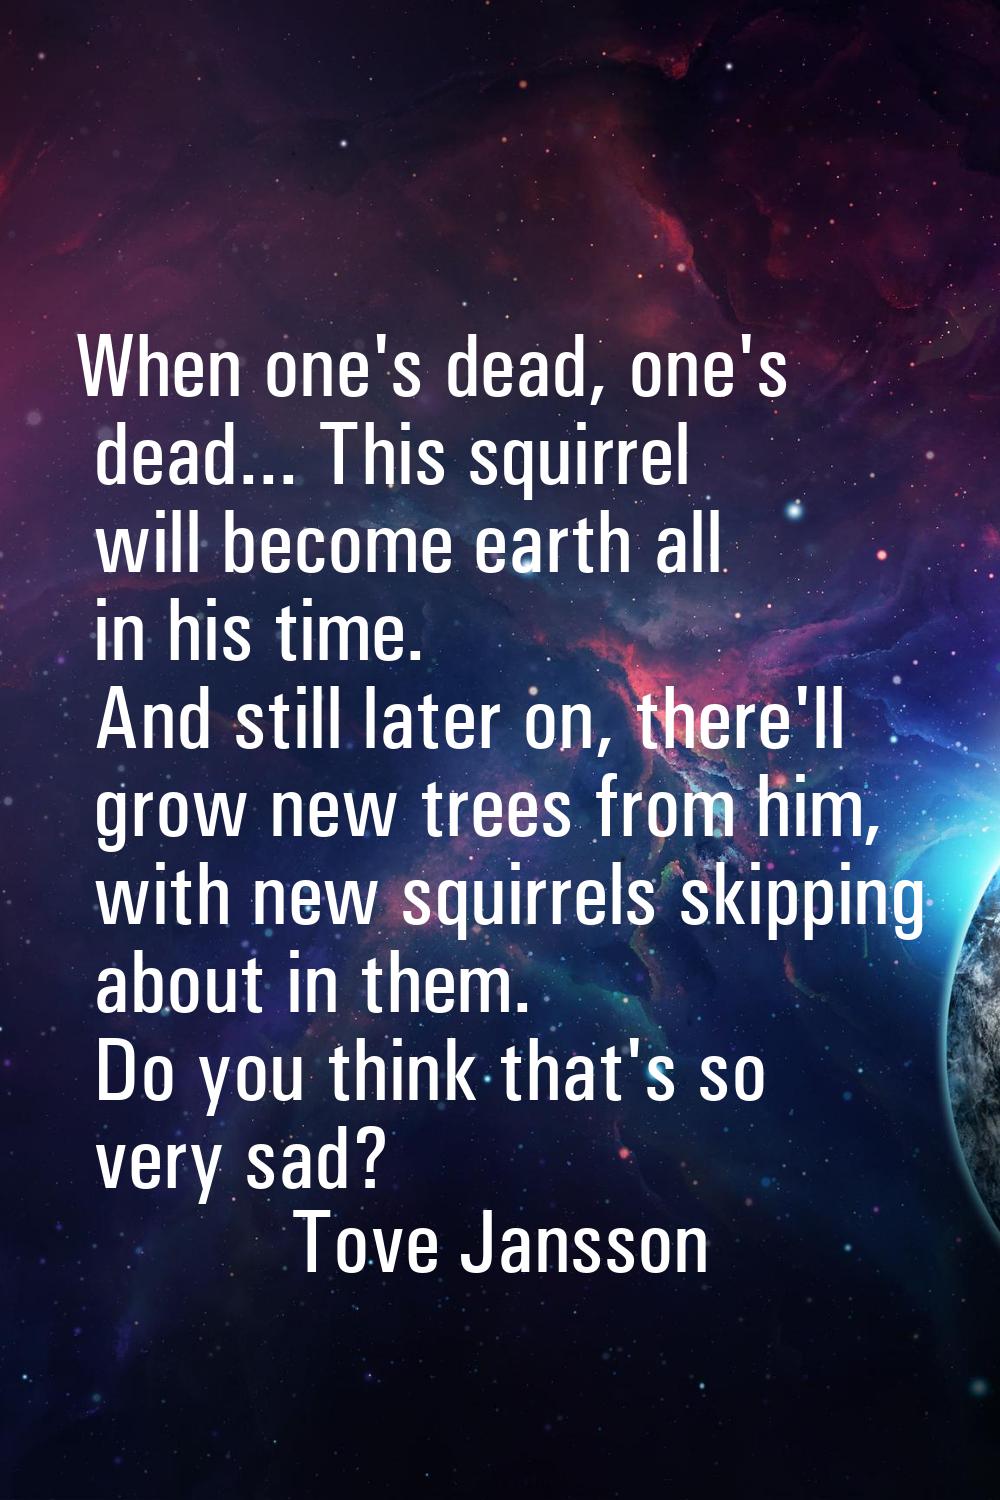 When one's dead, one's dead... This squirrel will become earth all in his time. And still later on,